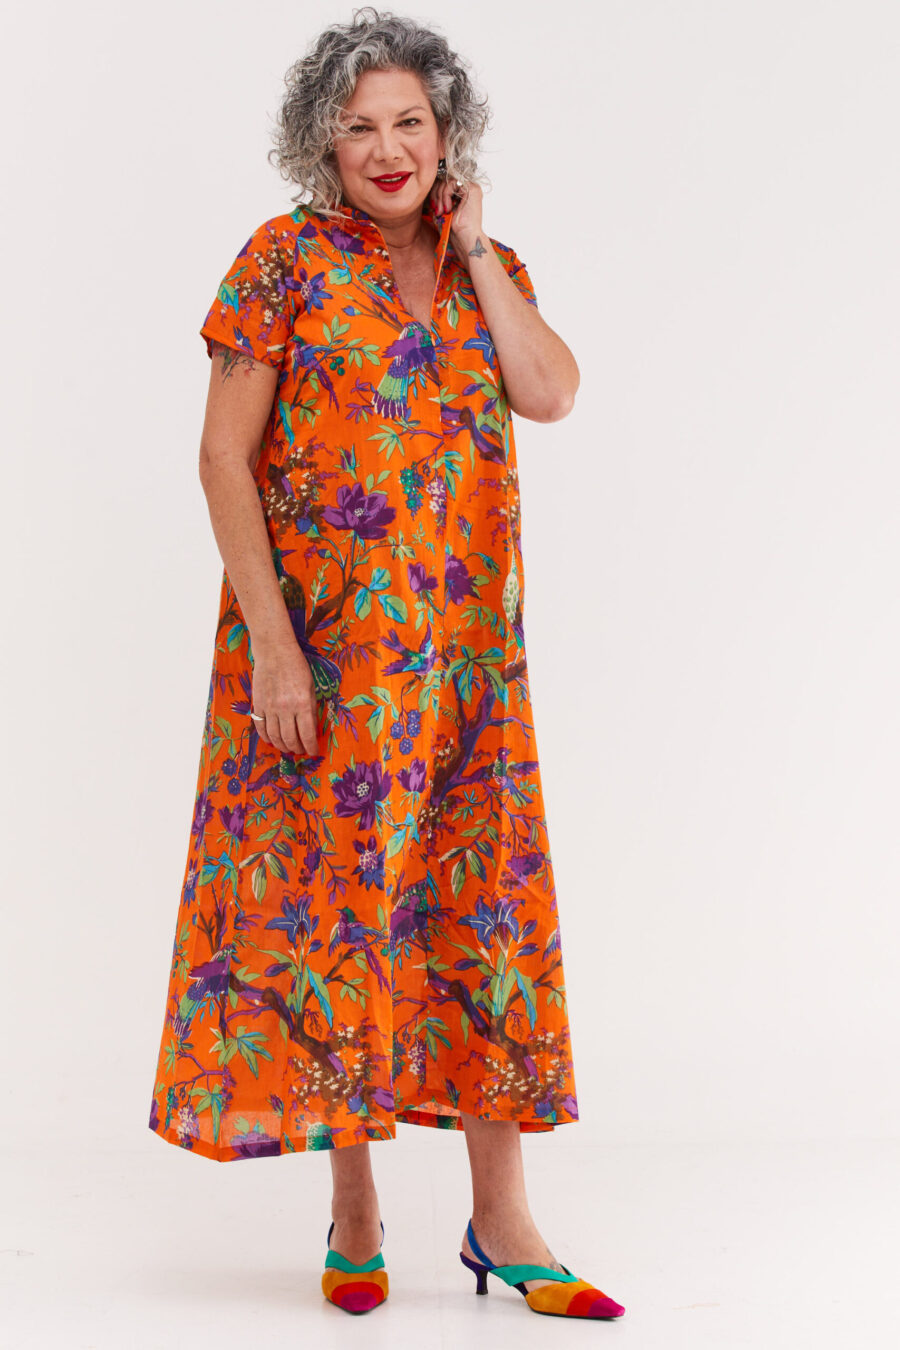 Maiko dress | Japanese dress with a unique high collar – Orange tropicana, colorful tropical print on an orange backgroung by comfort zone boutique